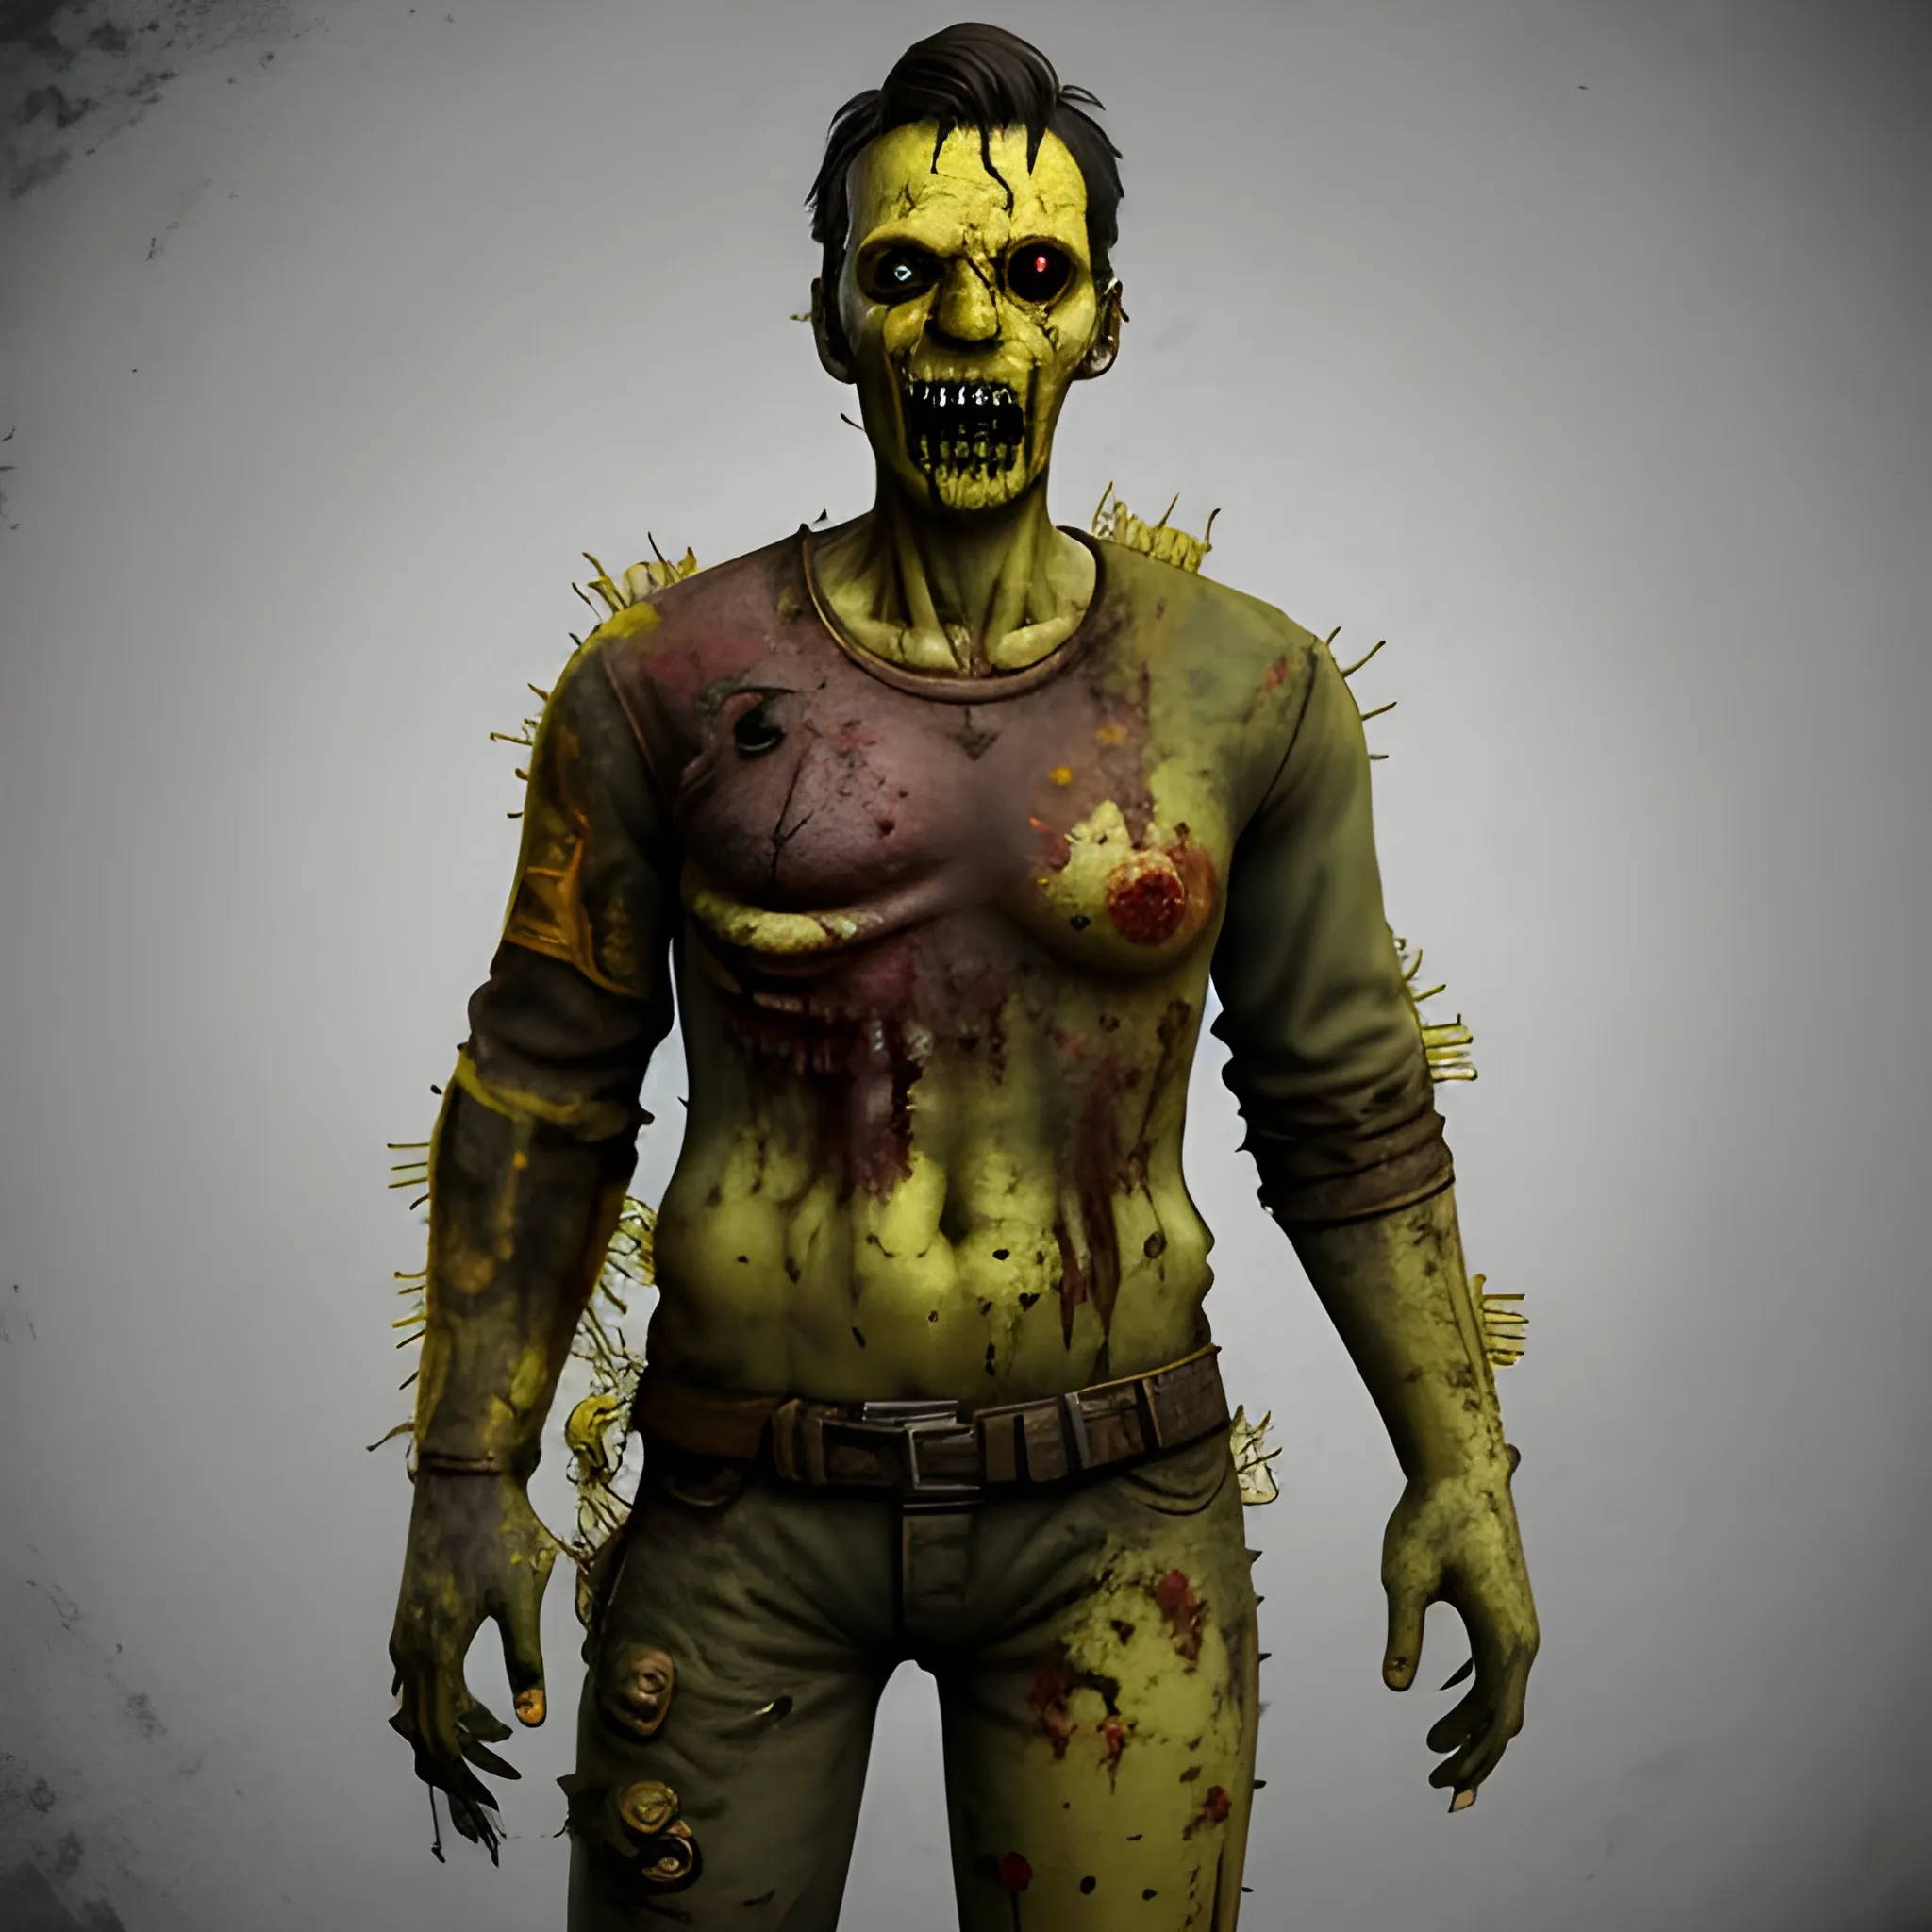 fallout 4 style, masterpiece, full body feral zombie with yellow skin, no nose, and several glowing pustules

